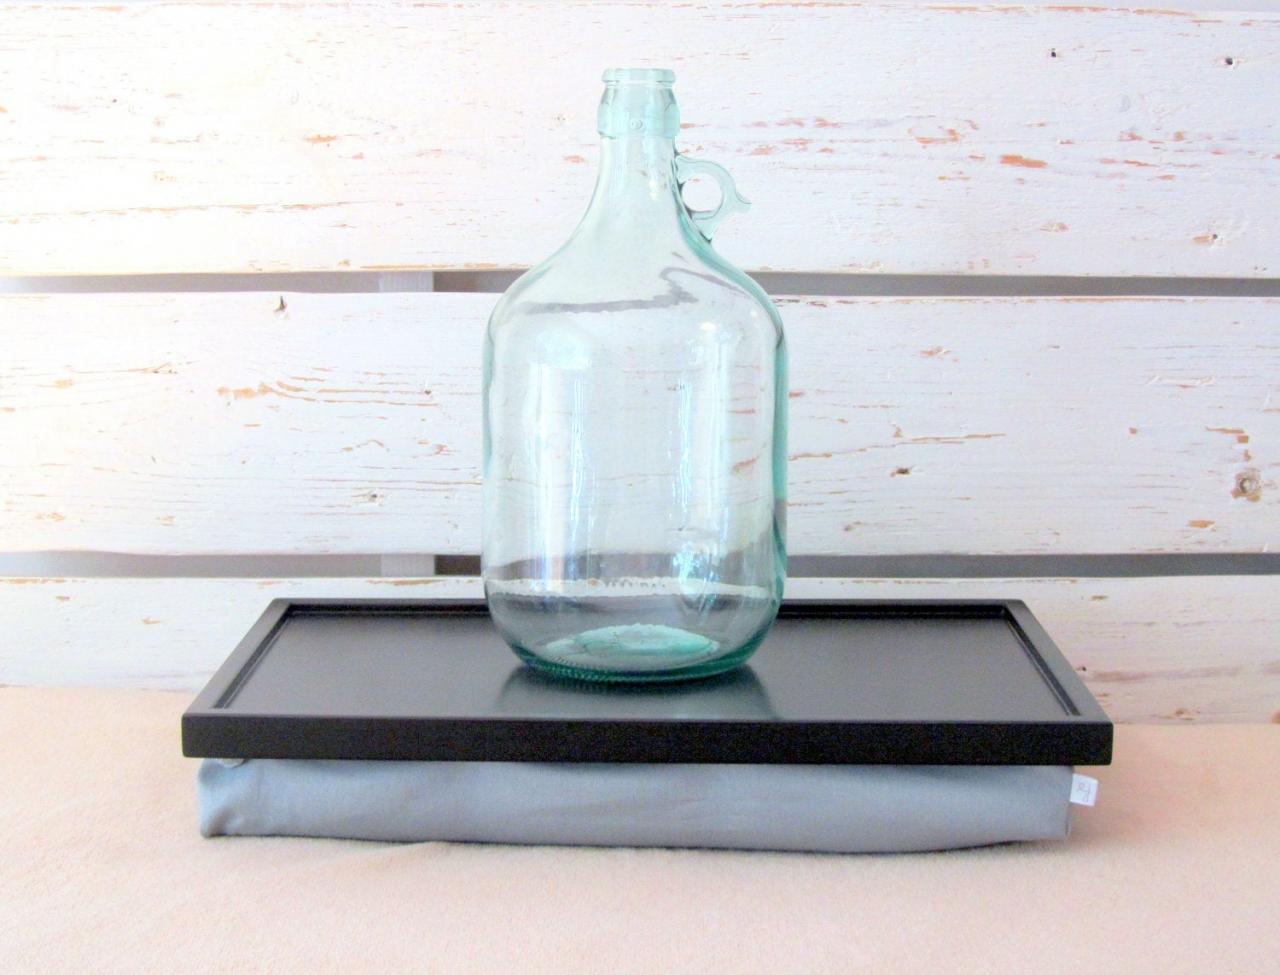 Wood Bed Tray, Laptop Lap Desk Or Breakfast Serving Tray - Black With Grey Cotton Fabric Pillow